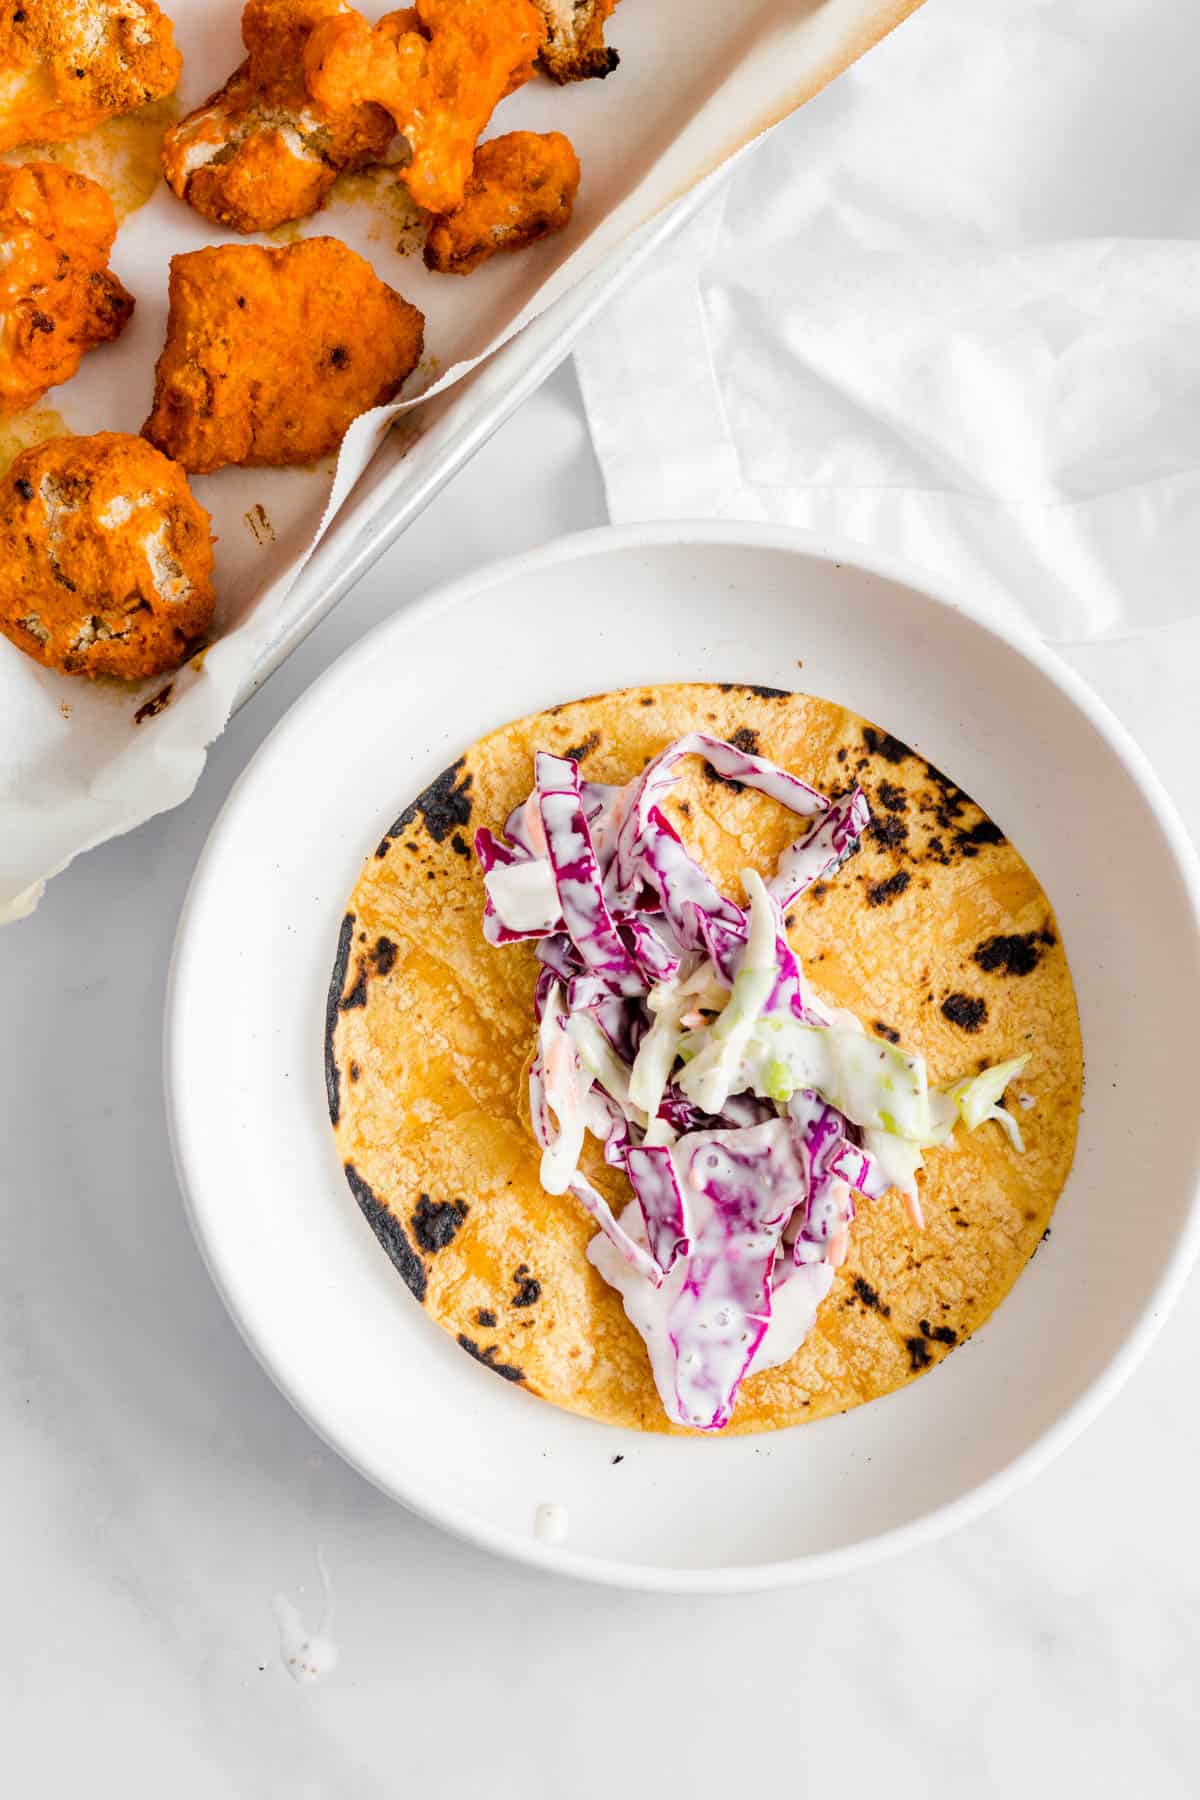 Coleslaw added to charred tortilla.